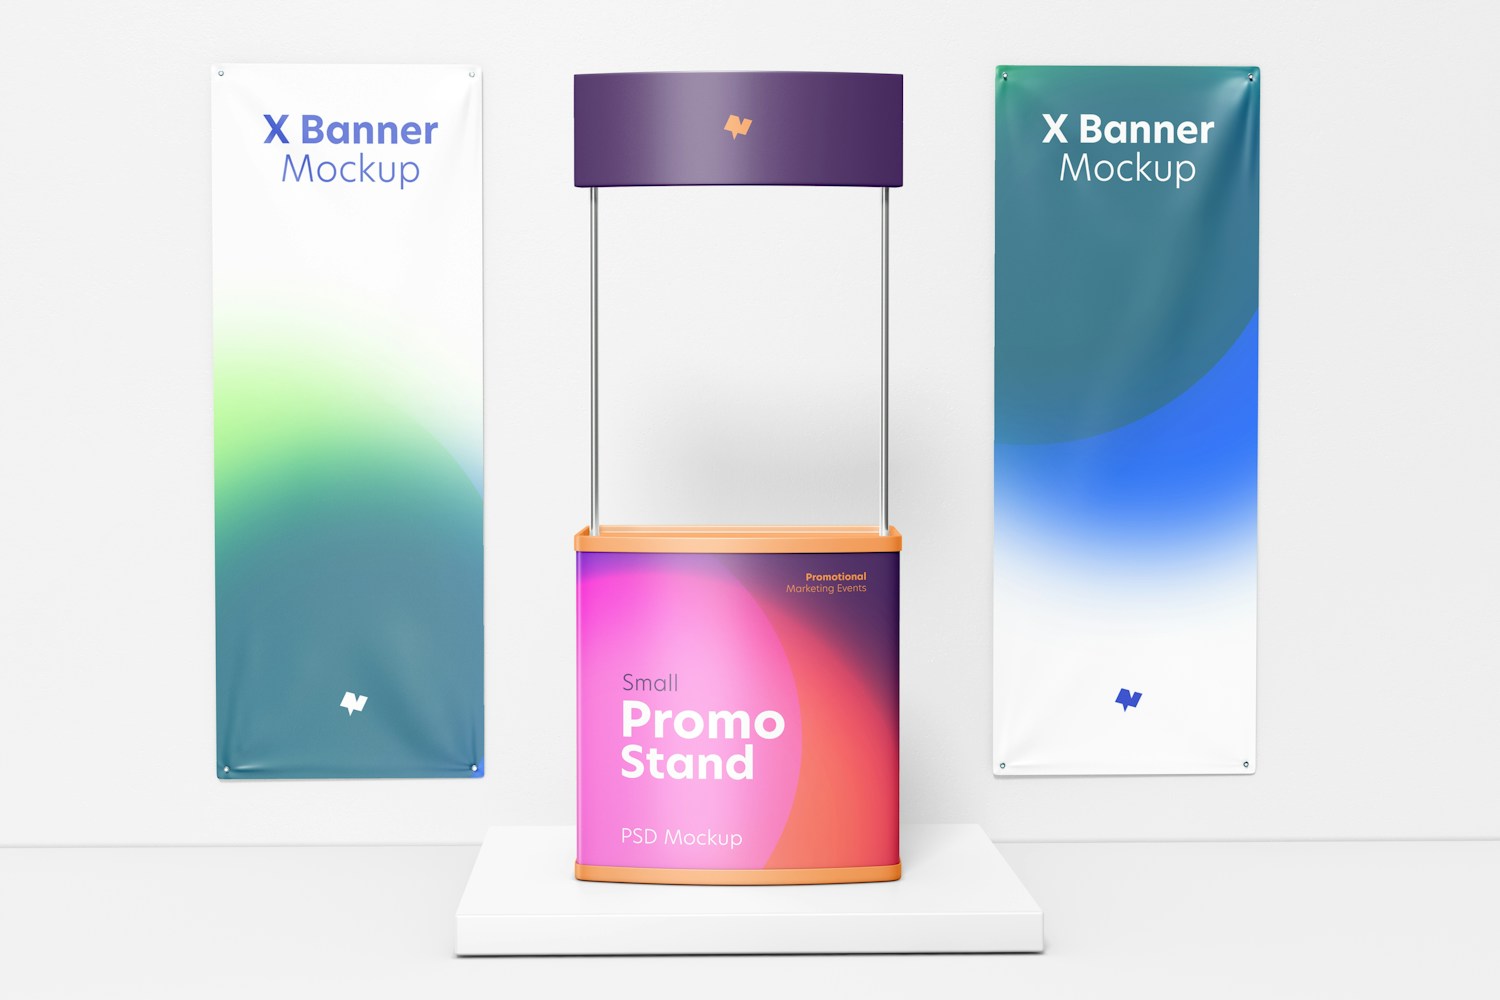 Small Promo Stand with X Banners Mockup